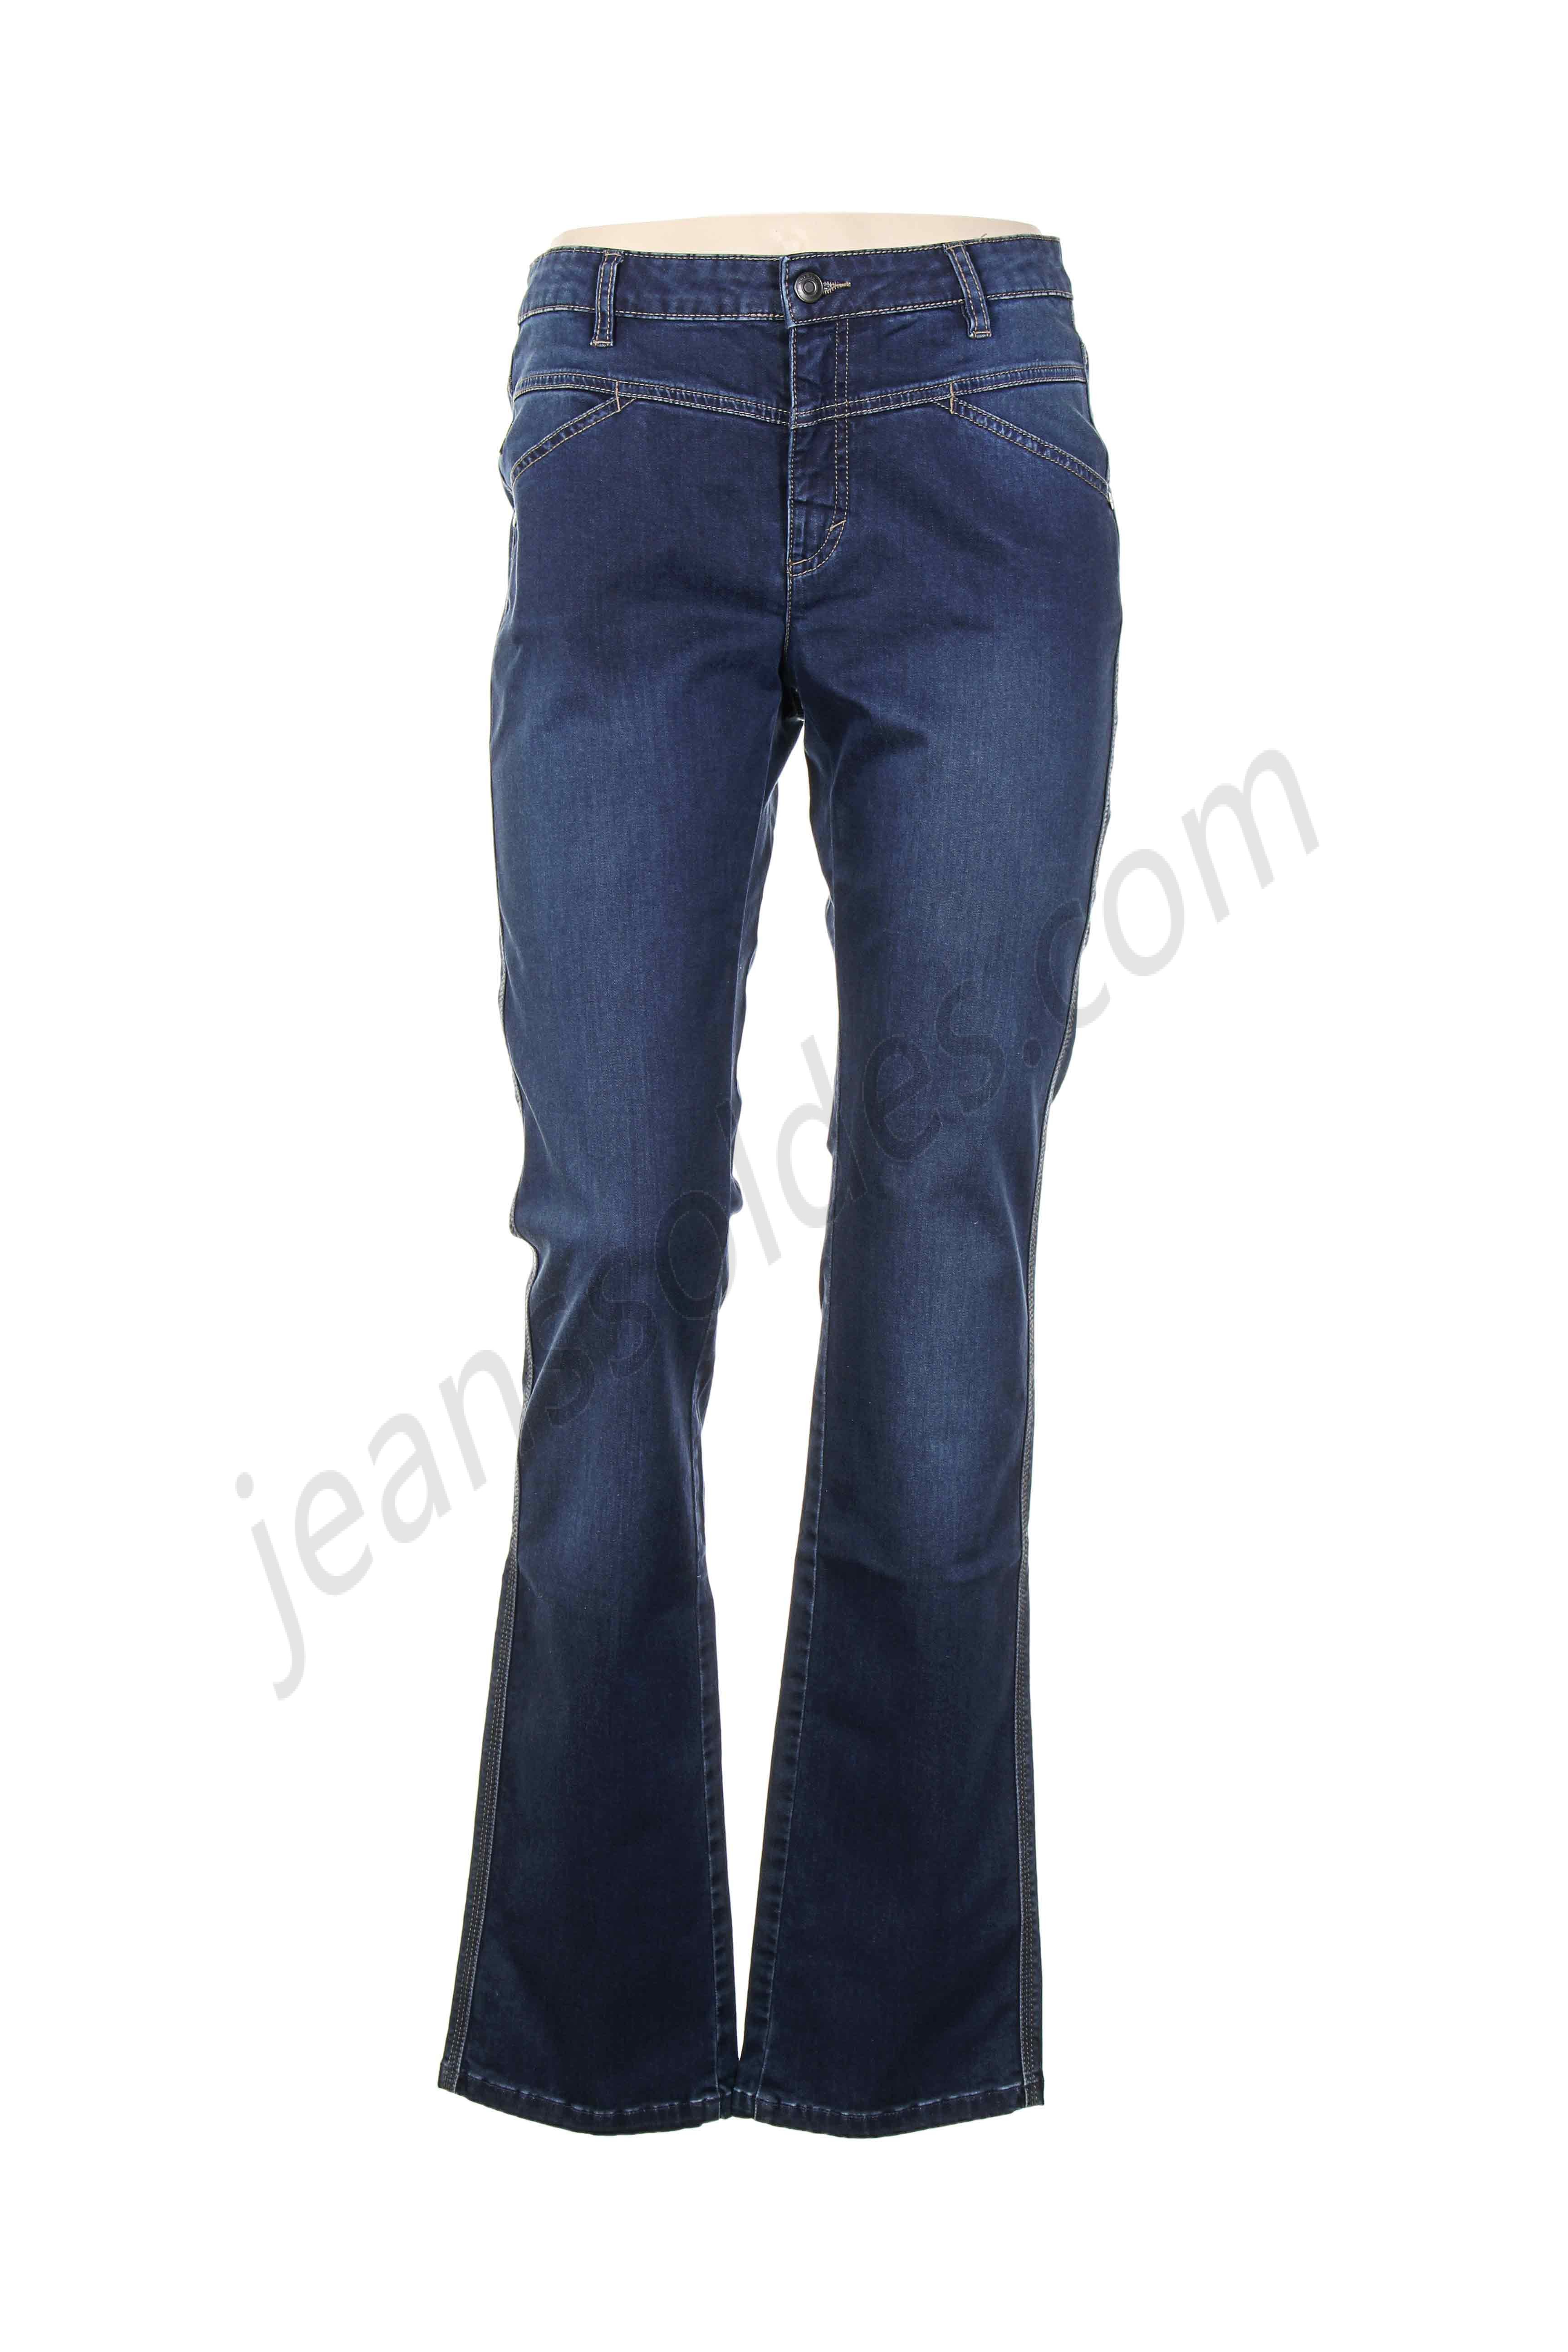 one step-Jeans coupe droite prix d’amis - one step-Jeans coupe droite prix d’amis